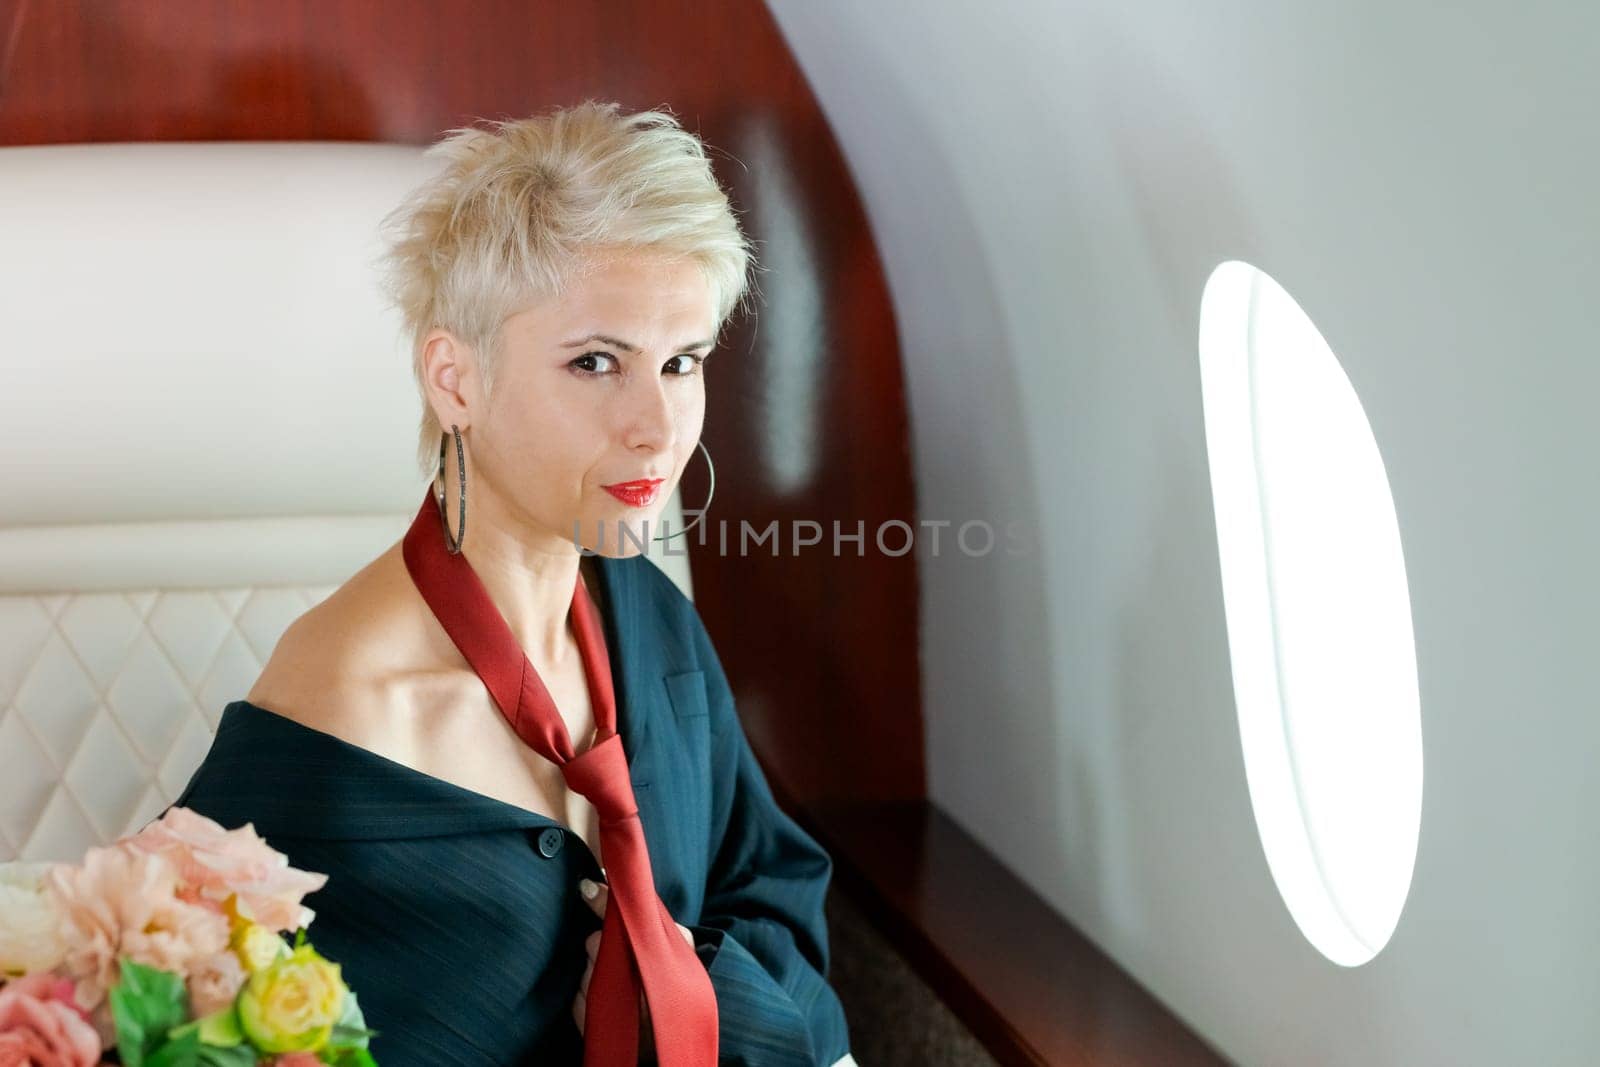 Woman private plane in a jacket with a red tie, New Year's Eve flight, holiday and travel concept. by EkaterinaPereslavtseva